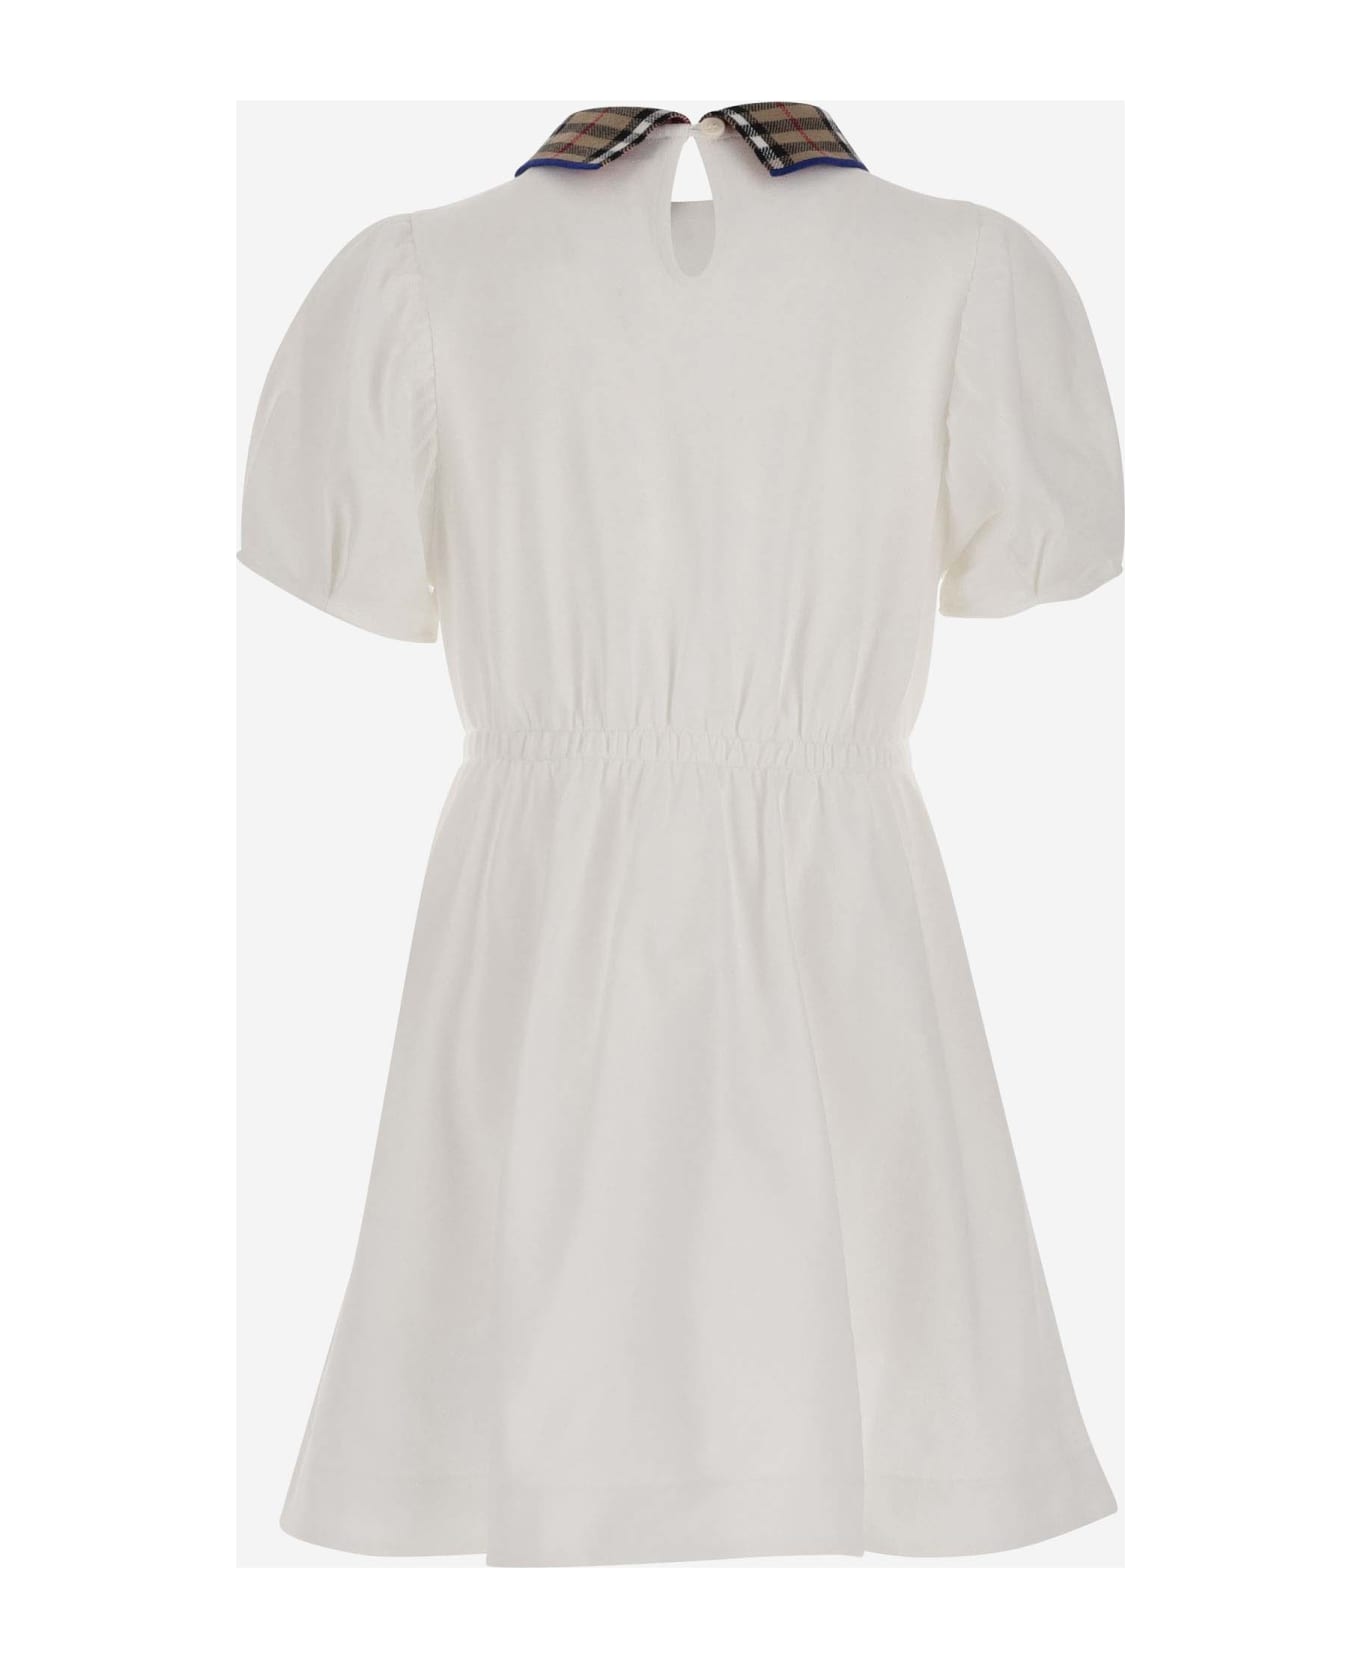 Burberry Polo Shirt Dress With Check Pattern - White